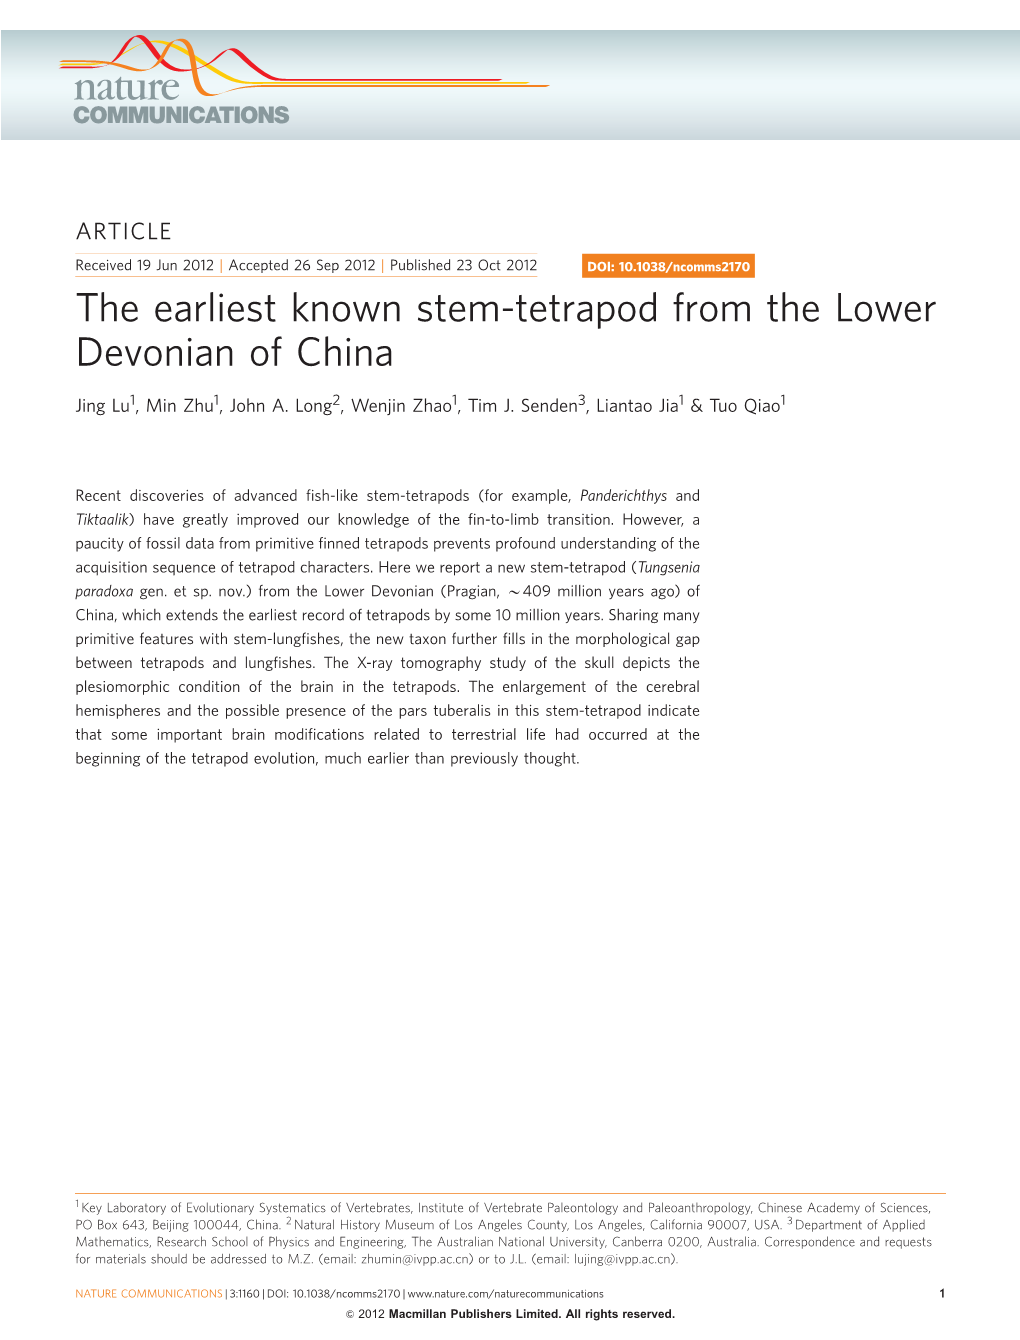 The Earliest Known Stem-Tetrapod from the Lower Devonian of China